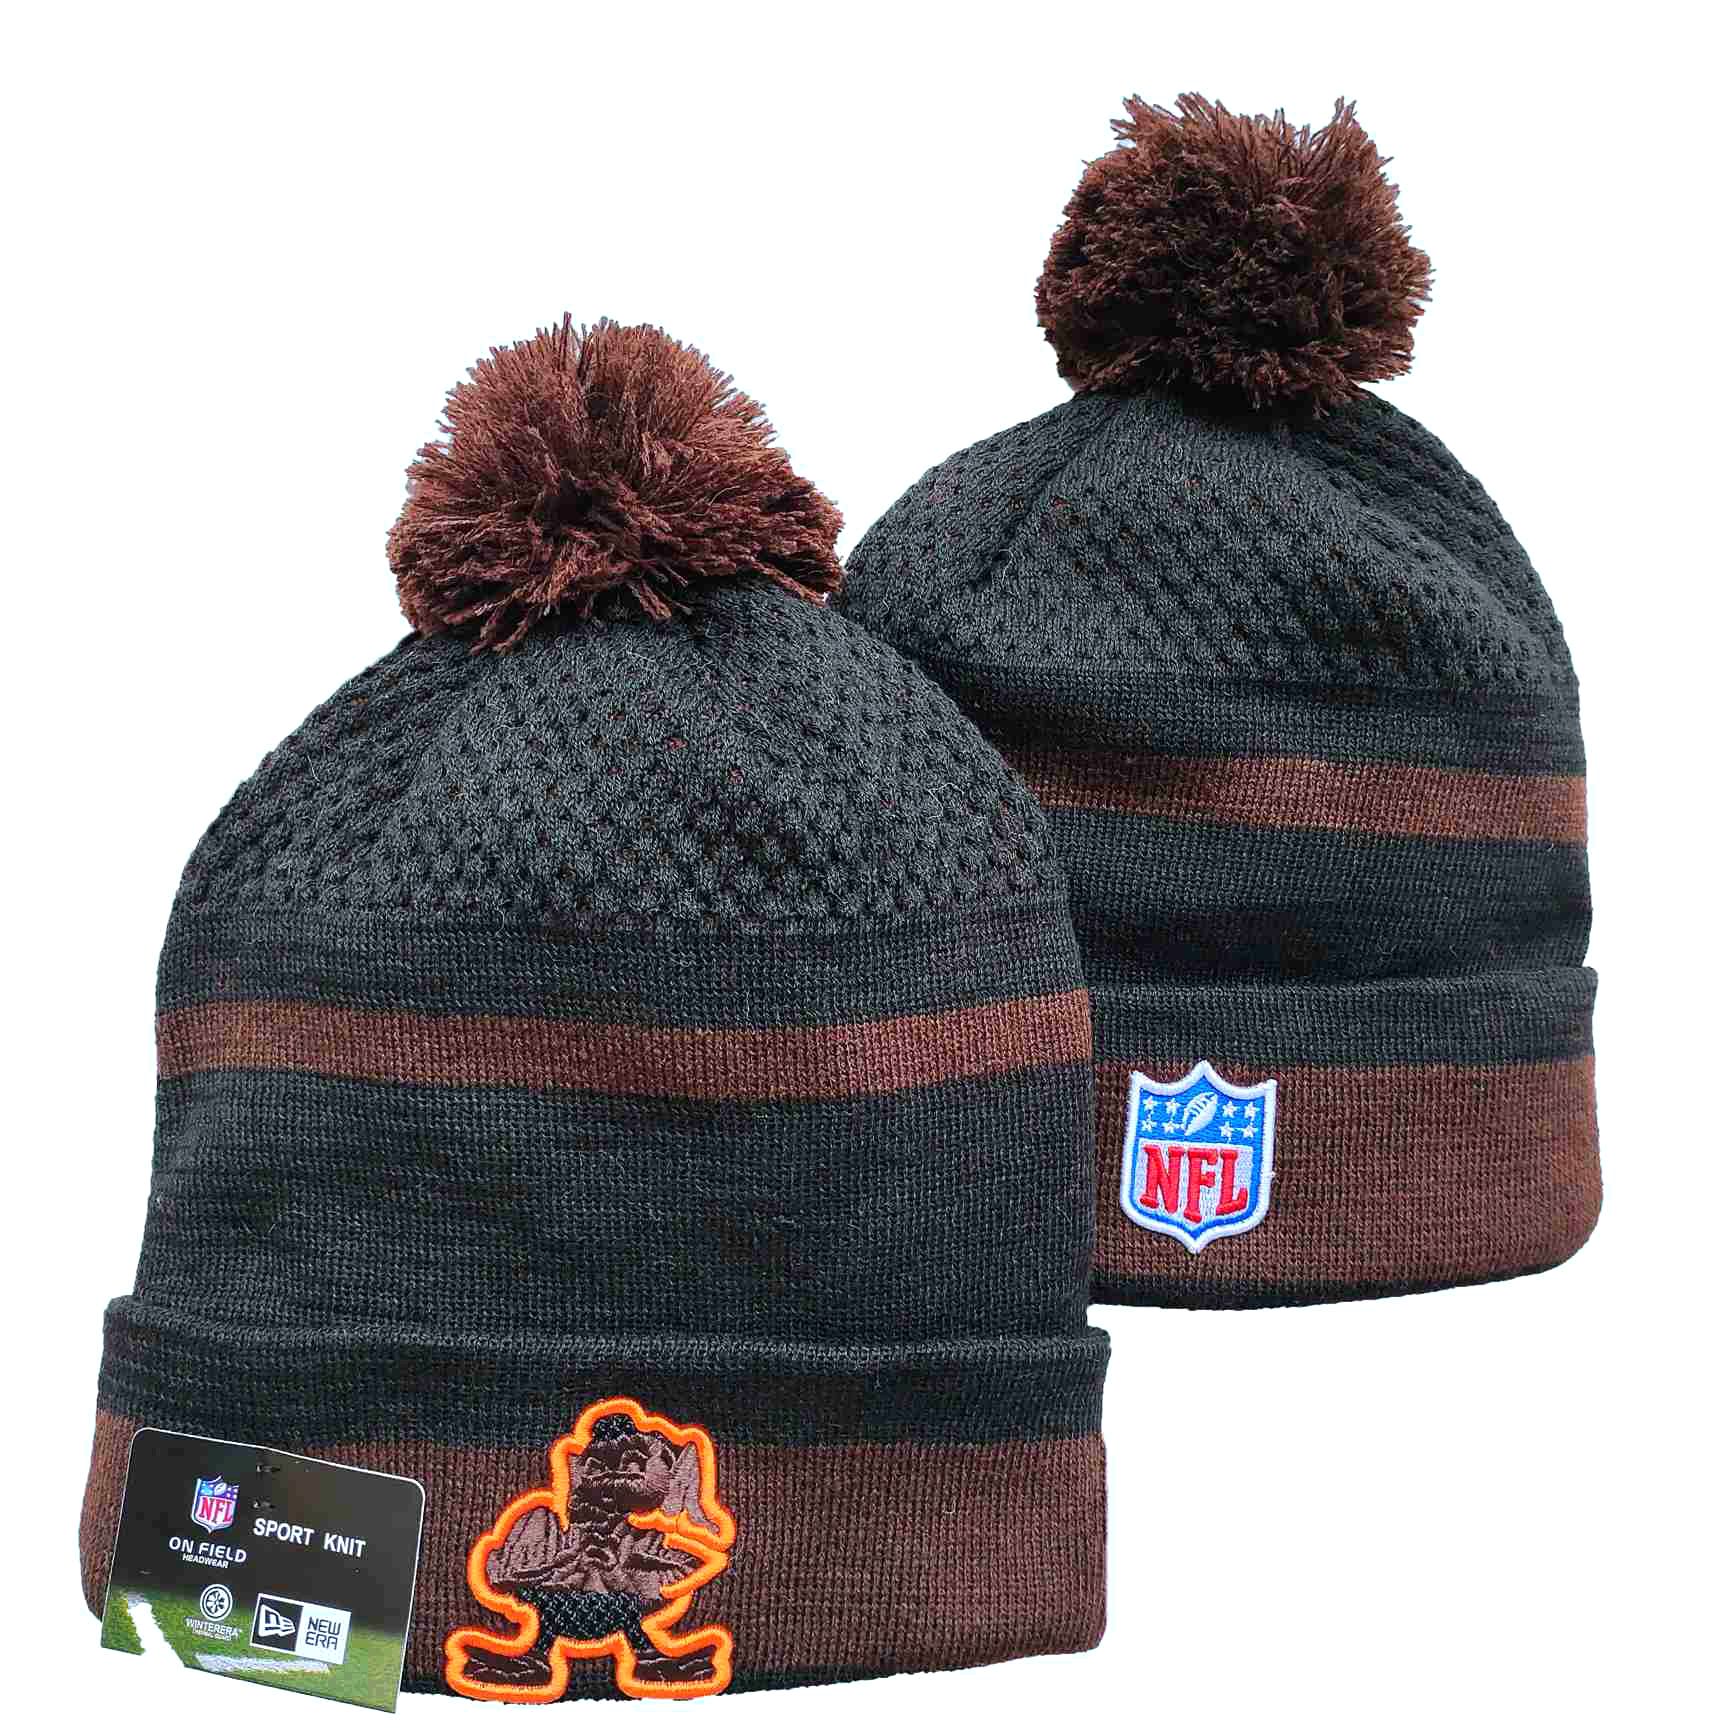 Cleveland Browns Knit Hats -4